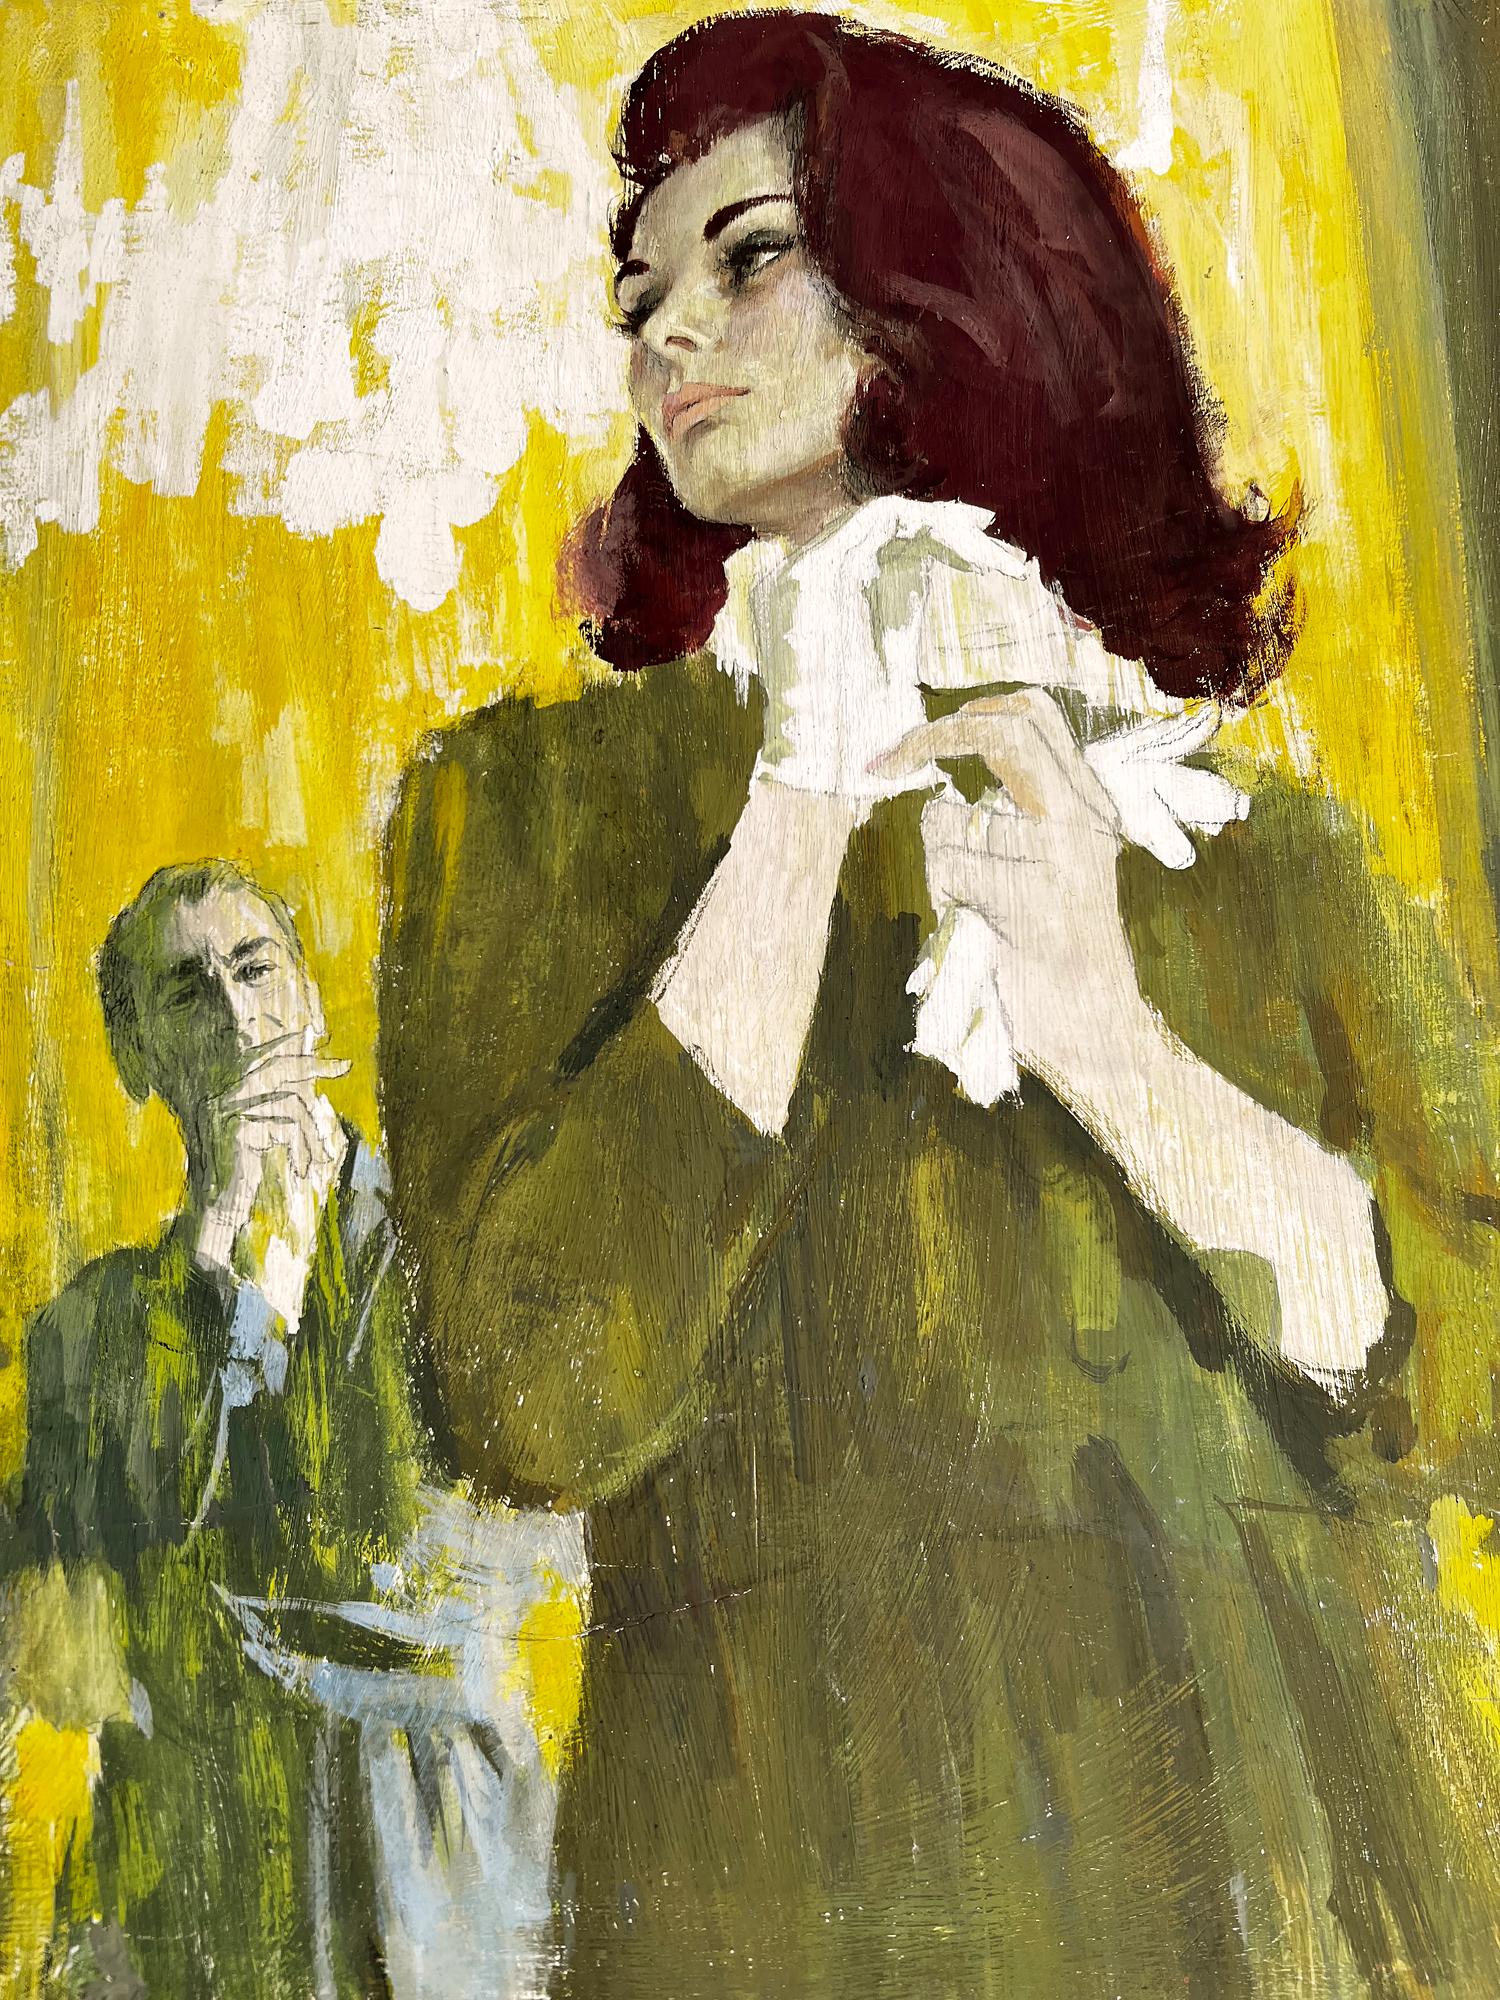 This impeccably rendered mid-century double portrait of a quarreling man and woman exhibits a supreme academic training knowledge lost in almost all contemporary art. It features an upward-looking close-up of a woman lost in thought while a man who